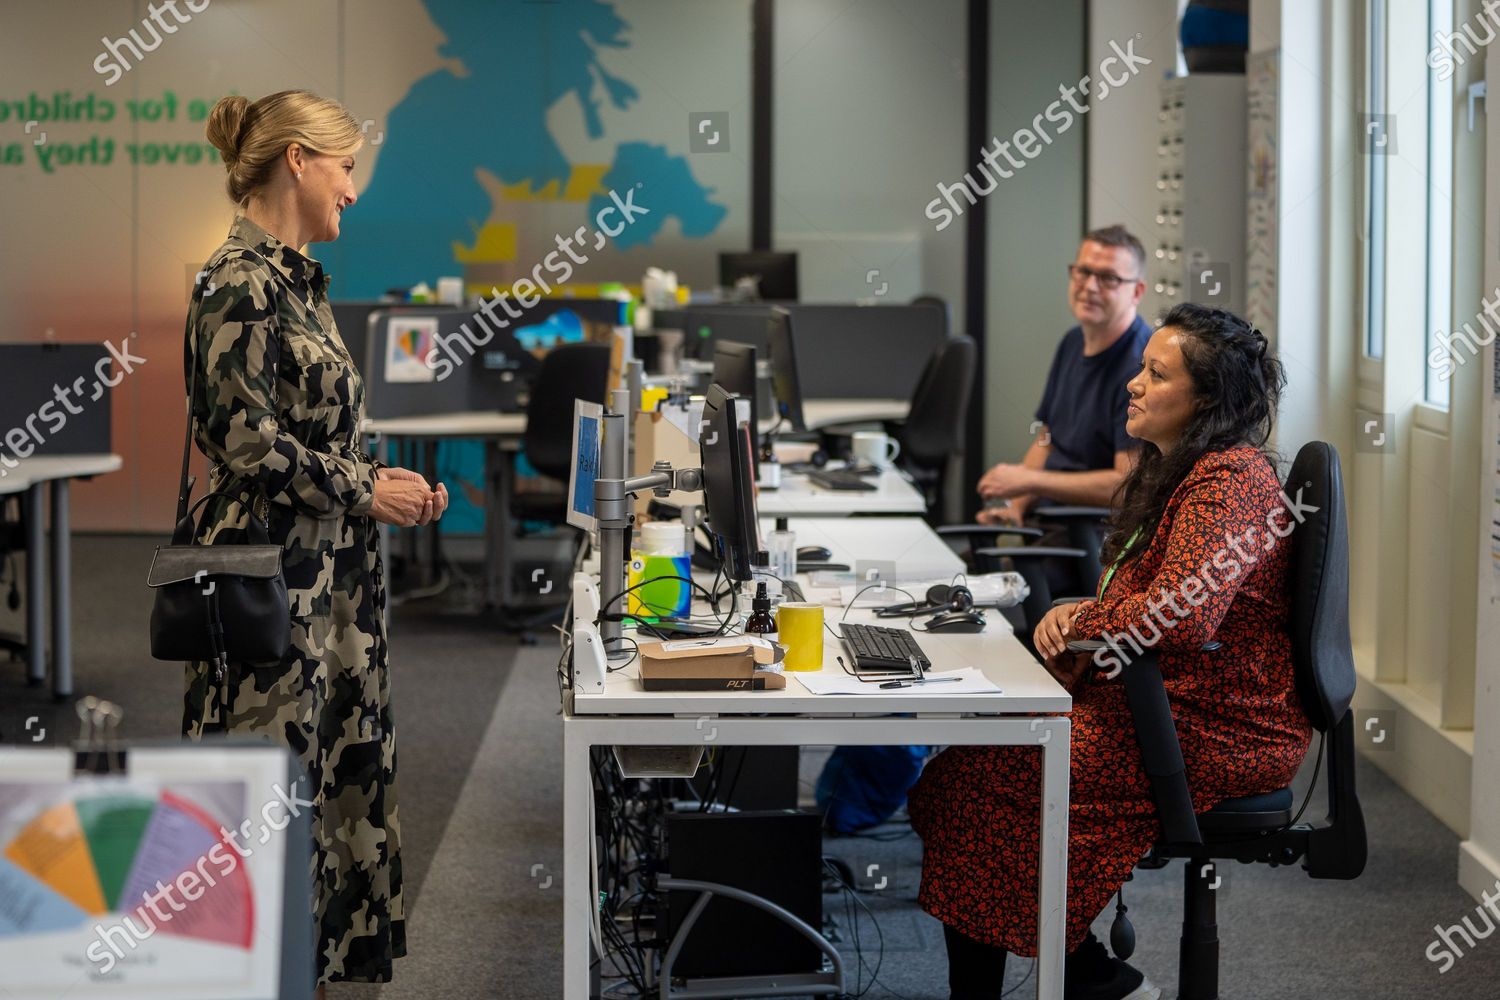 sophie-countess-of-wessex-joins-a-counselling-shift-at-childline-nspcc-hq-london-uk-shutterstock-editorial-10682513b.jpg